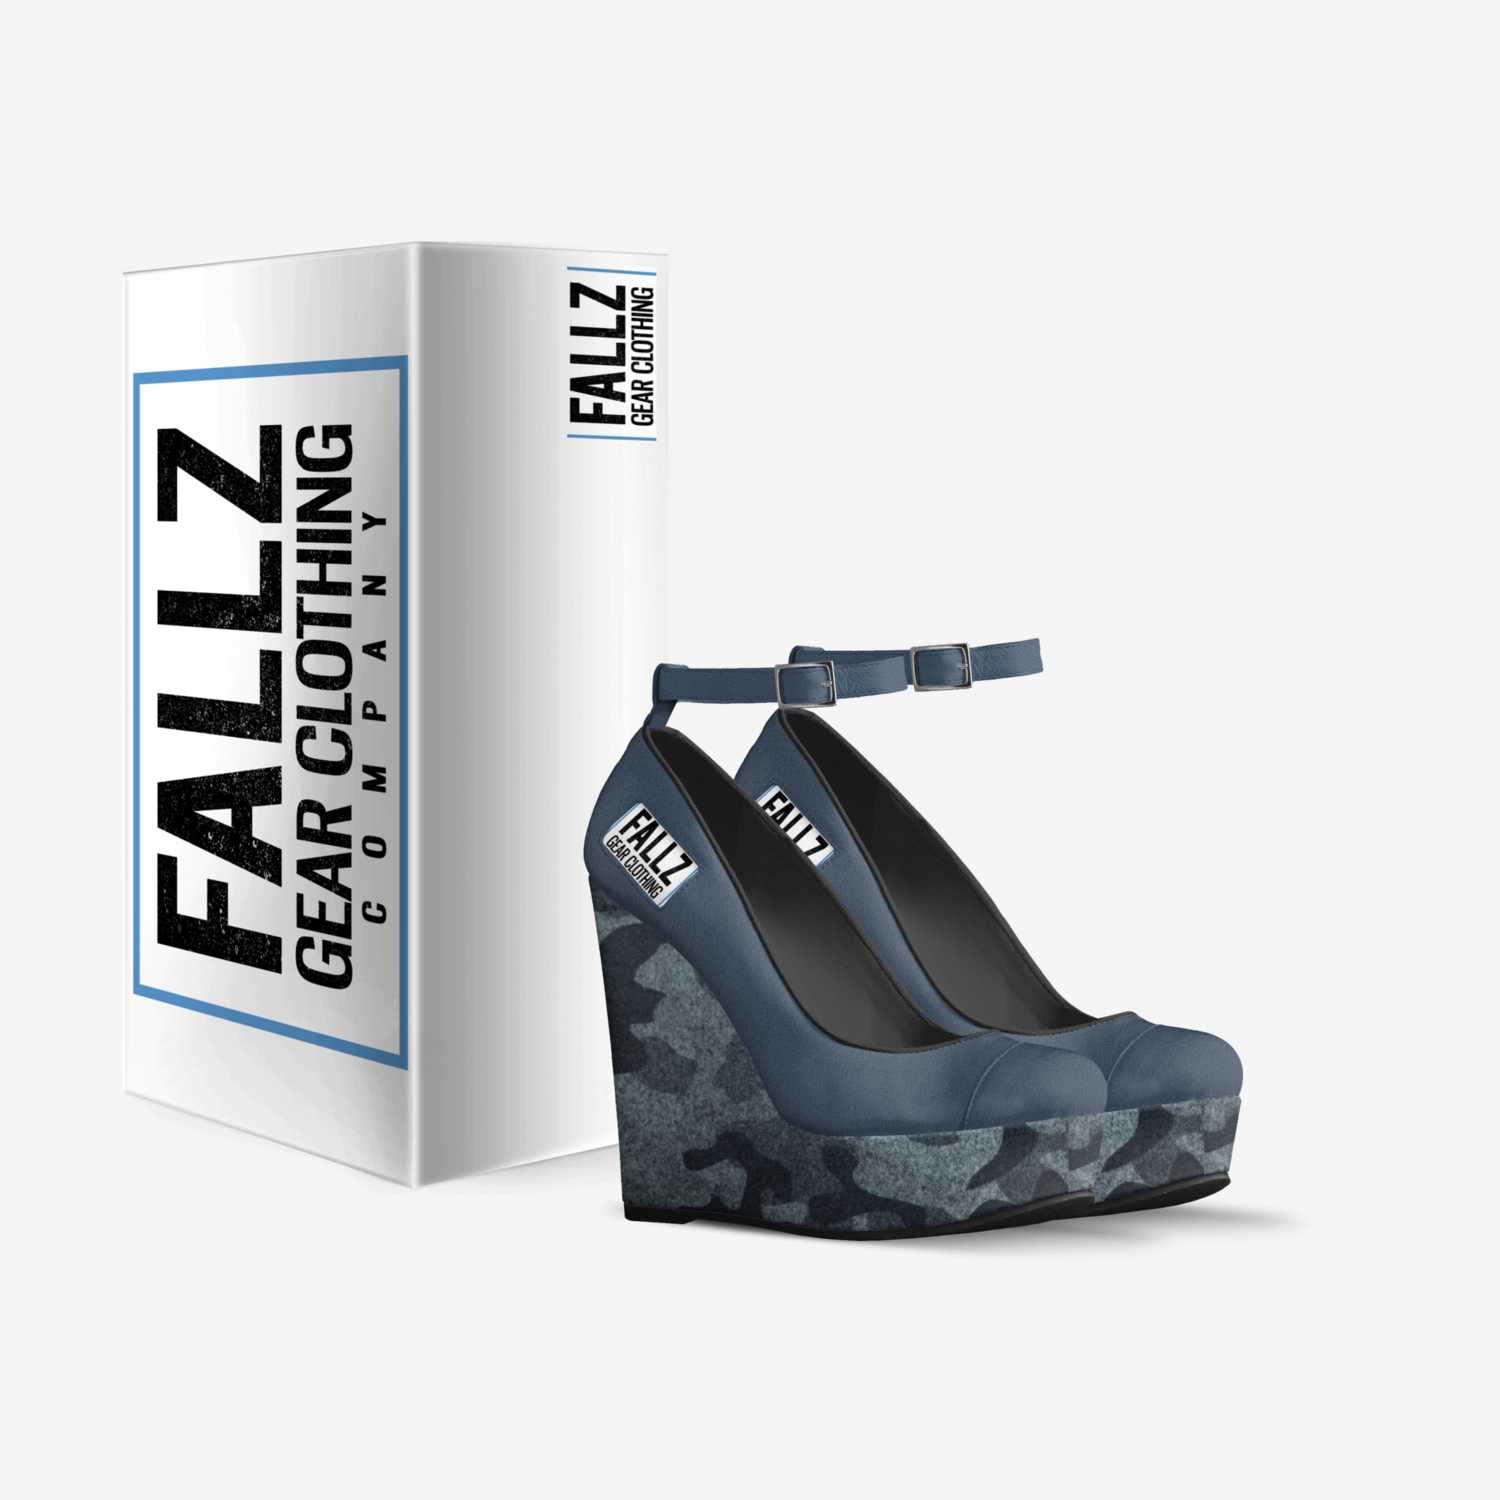 Fallz Gear: Point custom made in Italy shoes by Fallz Gear | Box view